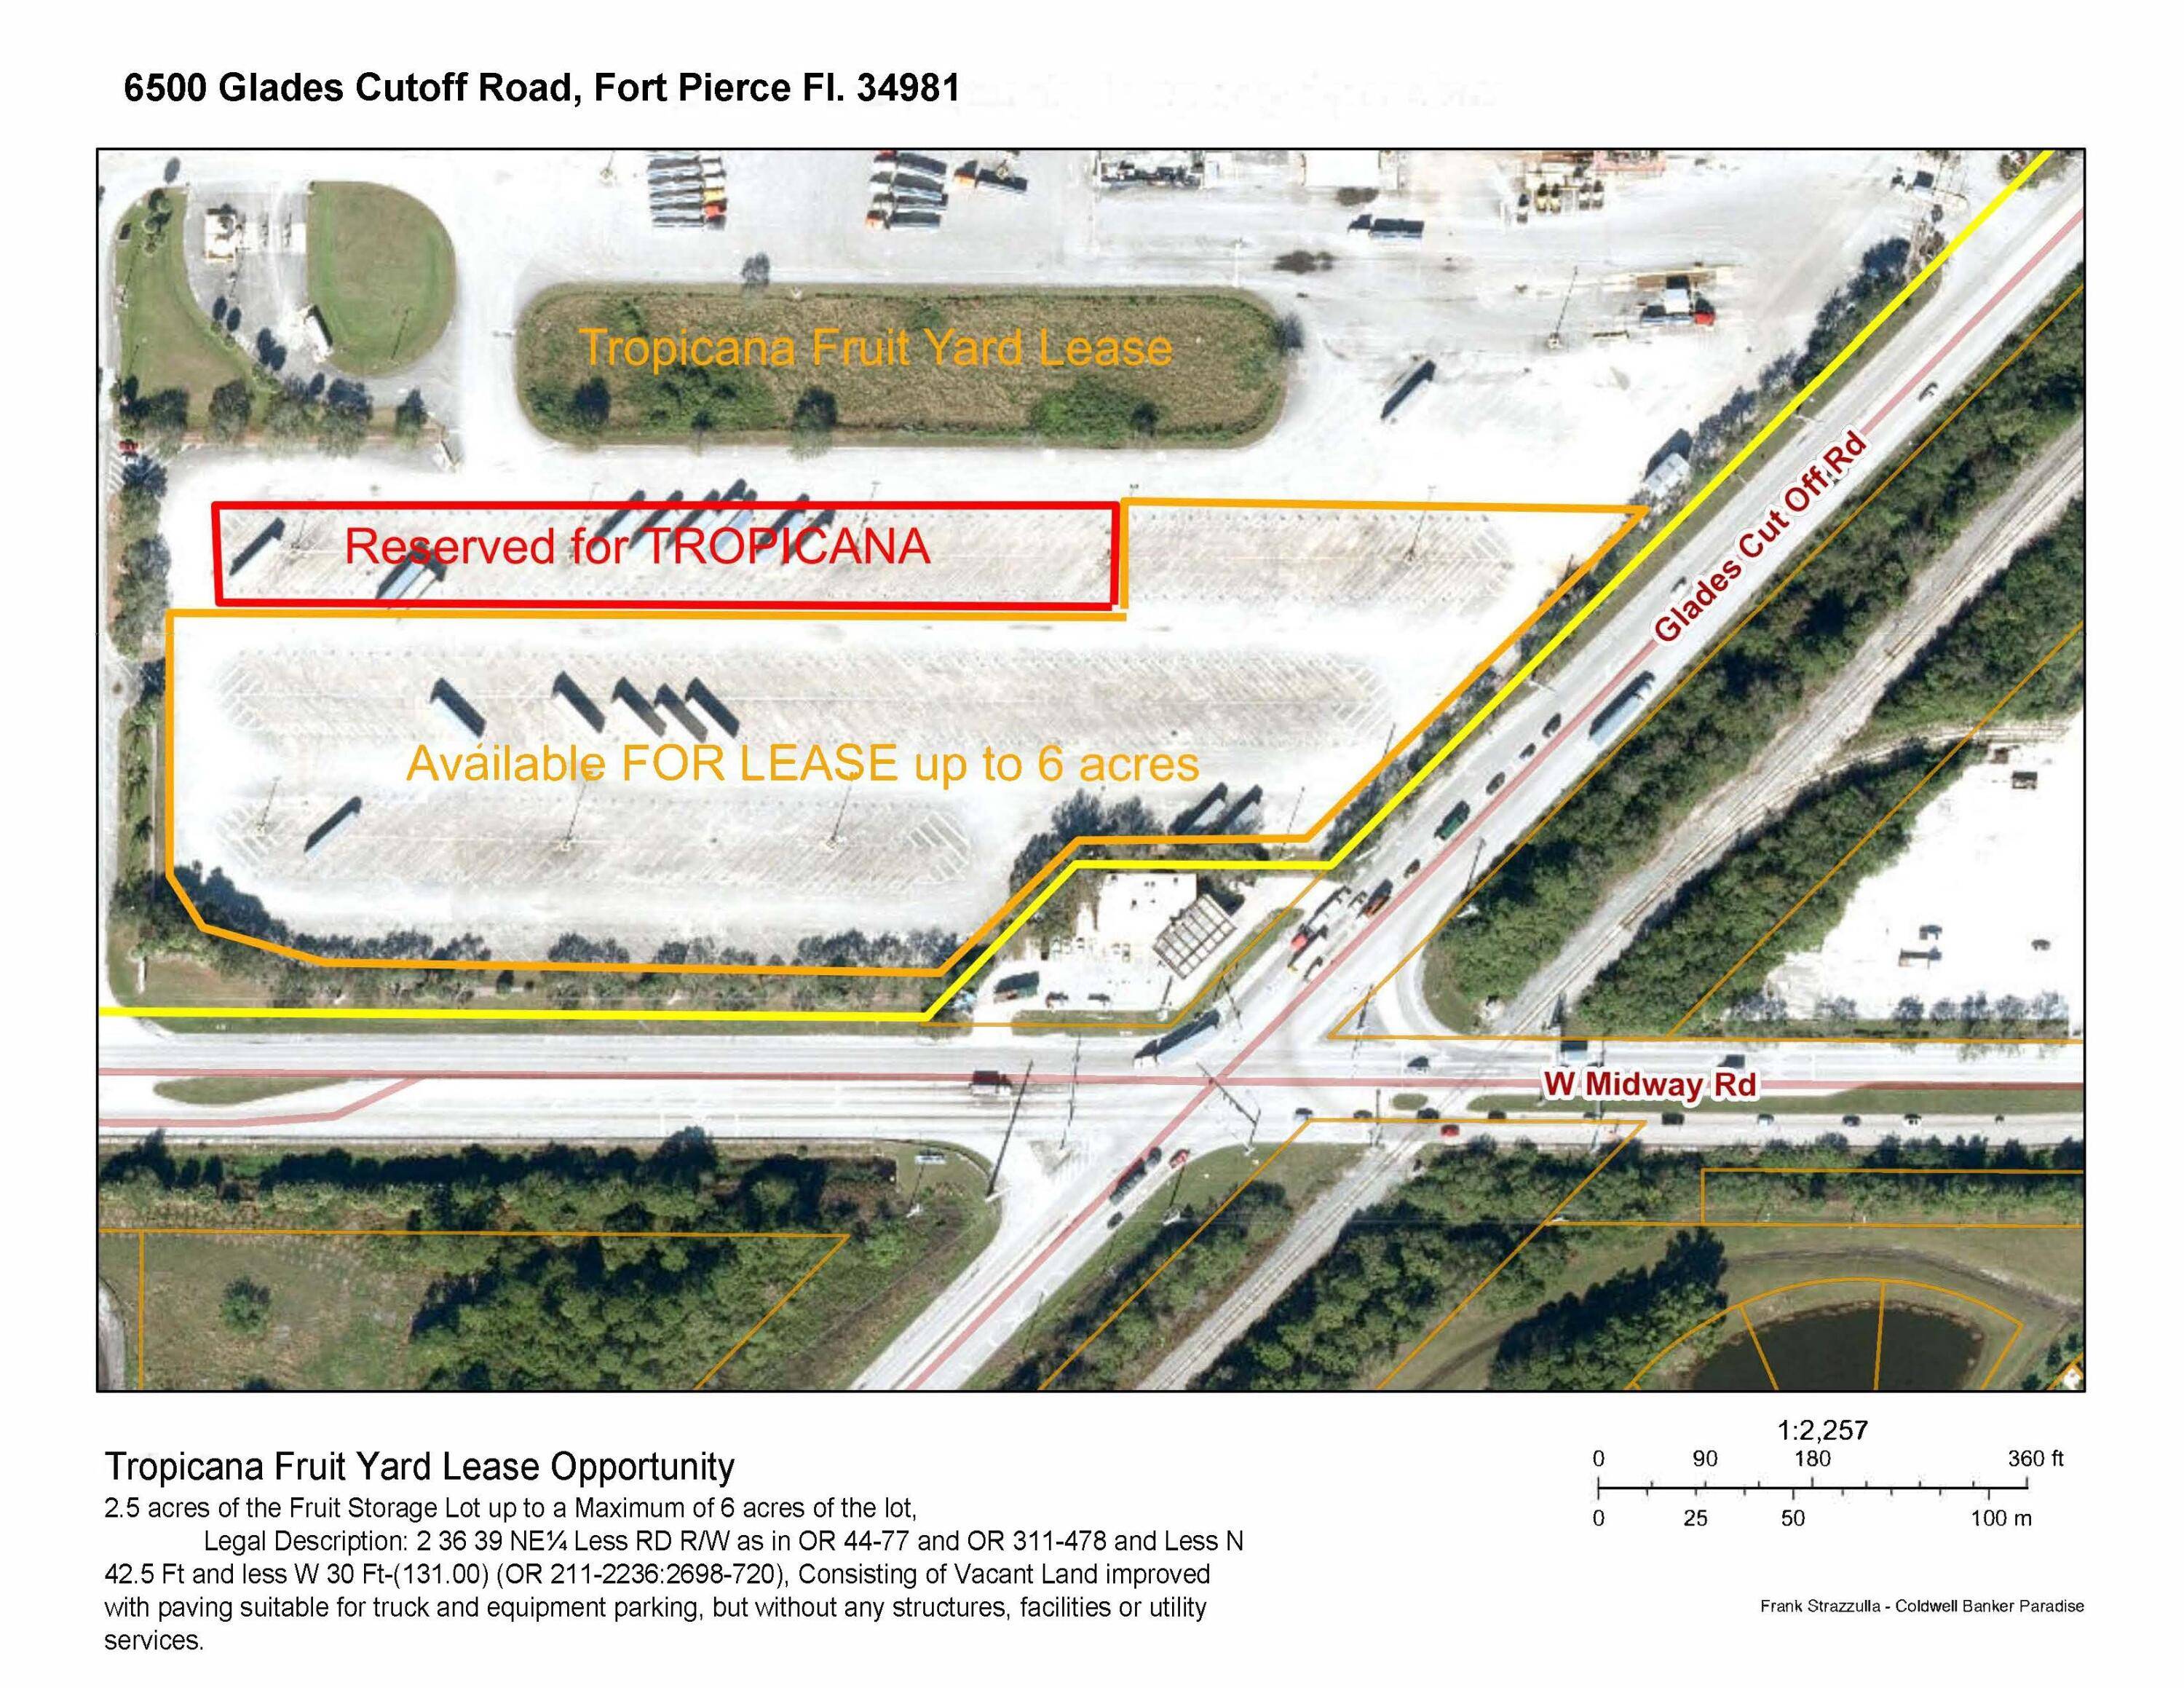 2. 5 to 6 Acres Consisting of Vacant Land improved Parking Area with paving and Fenced Lighted Security.